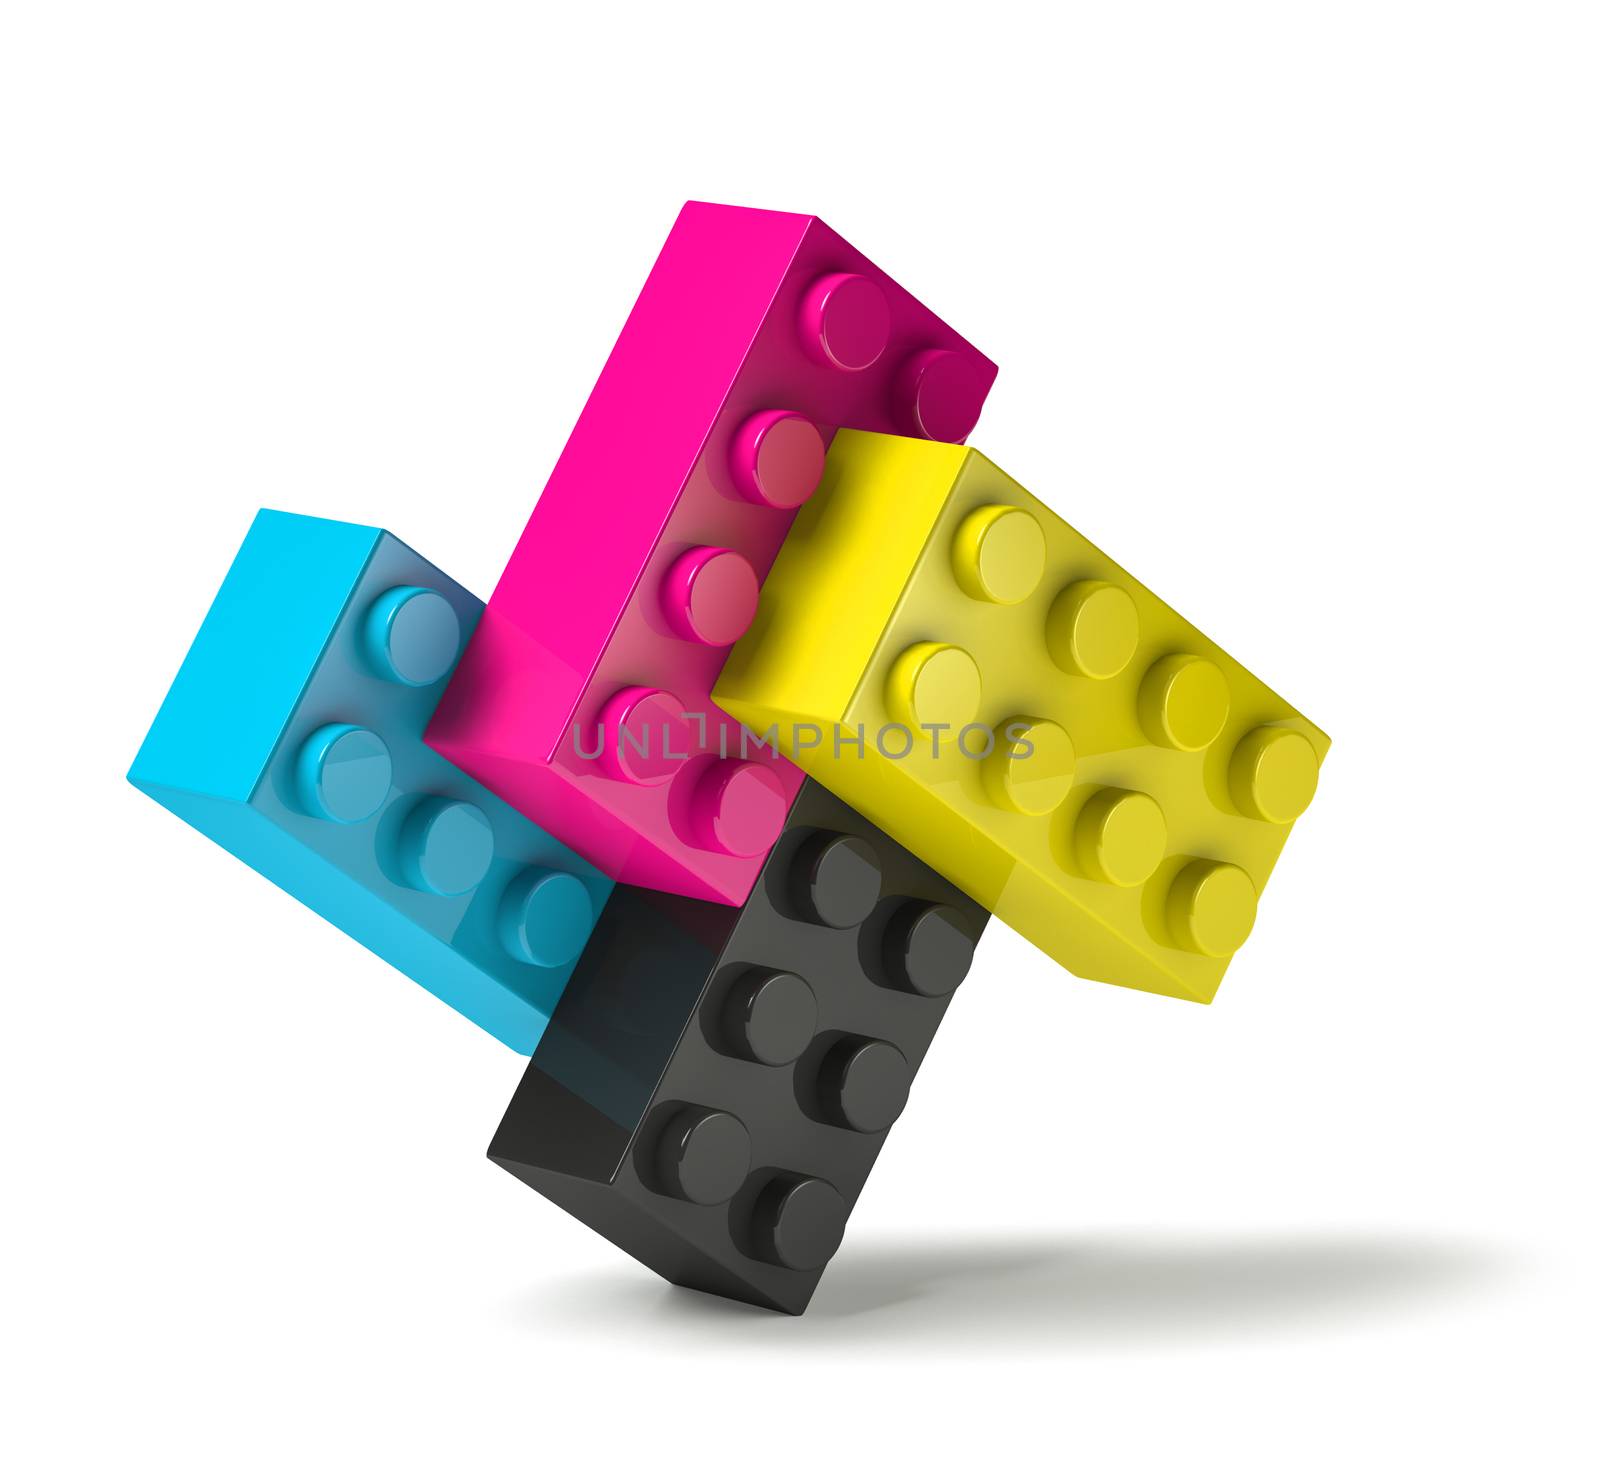 Building blocks of four printing process colors standing 3D by anterovium